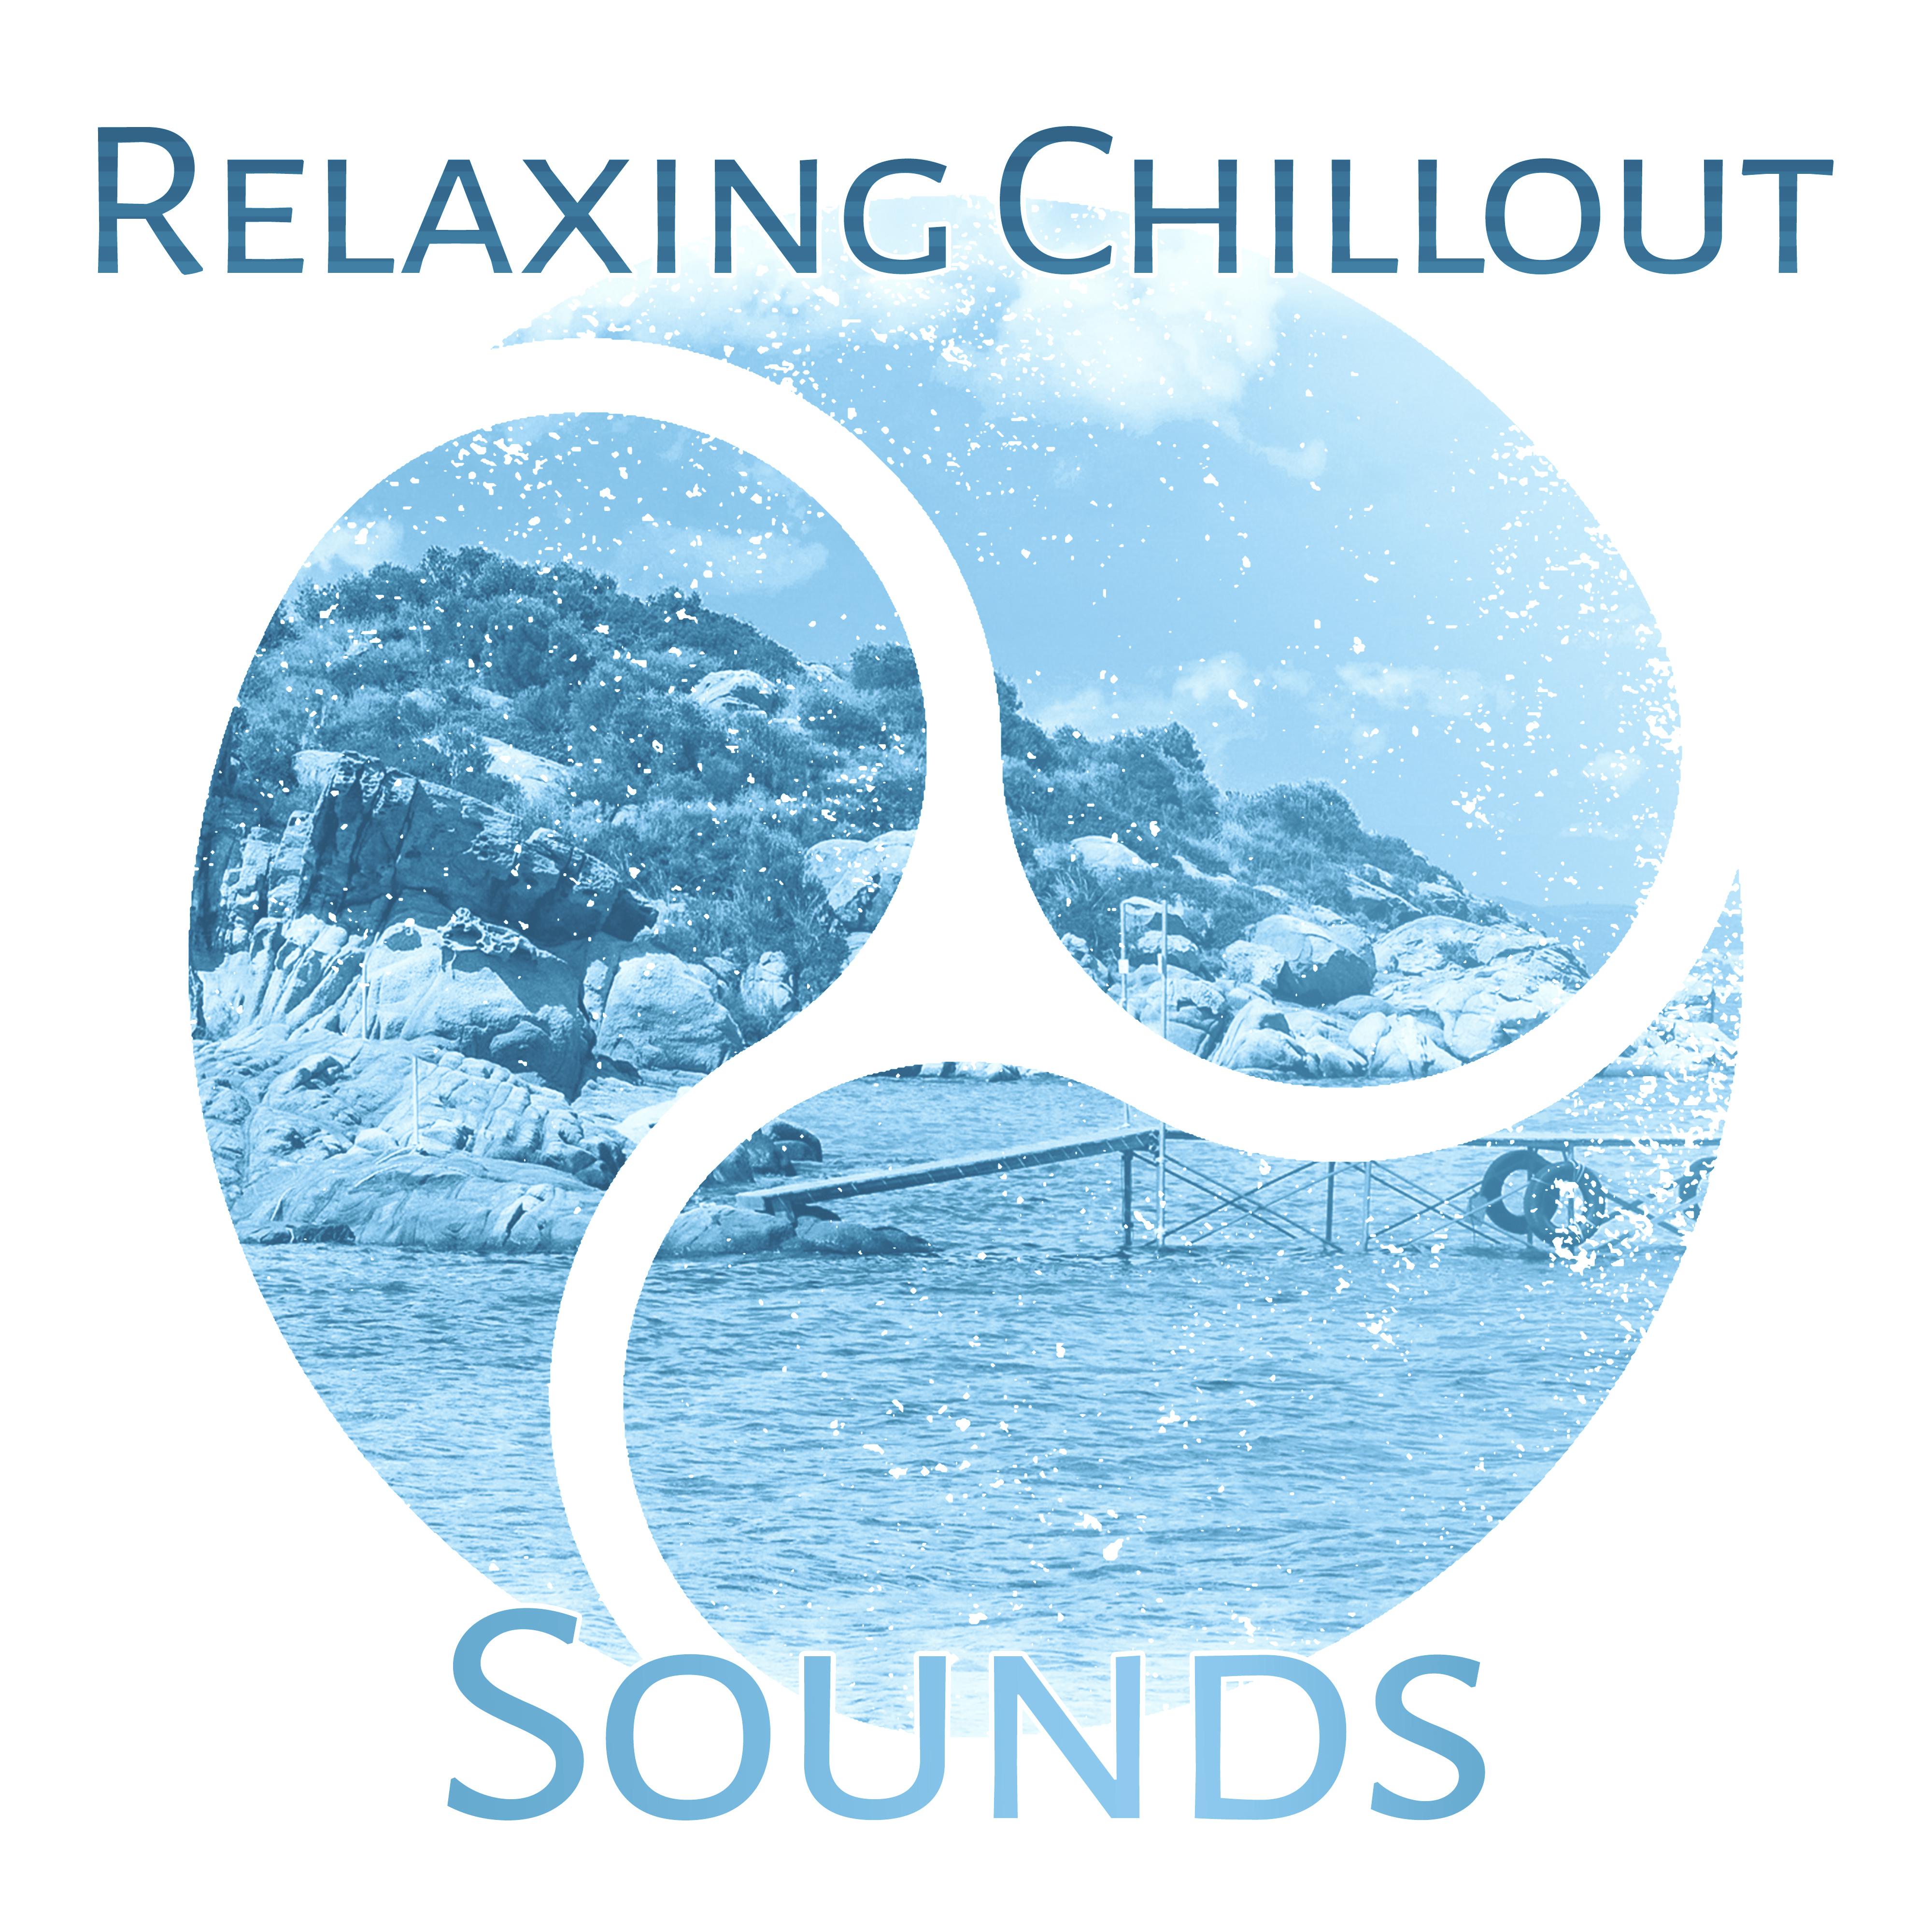 Relaxing Chillout Sounds  Music to Rest, Soft Sounds, Beach Lounge, Ibiza Chill Out